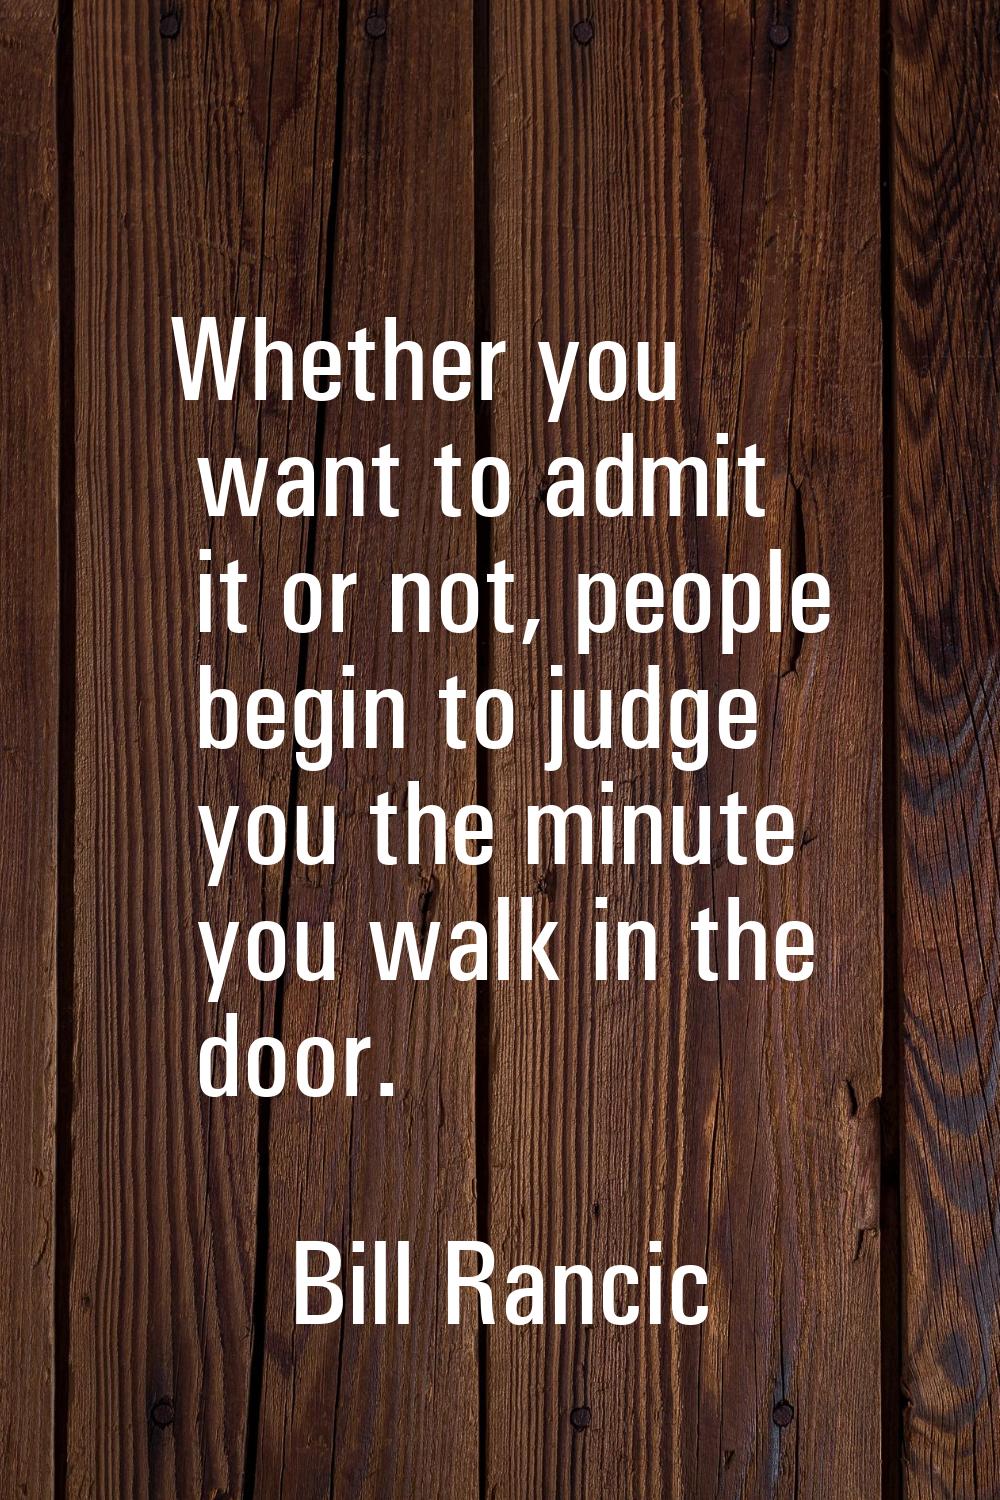 Whether you want to admit it or not, people begin to judge you the minute you walk in the door.